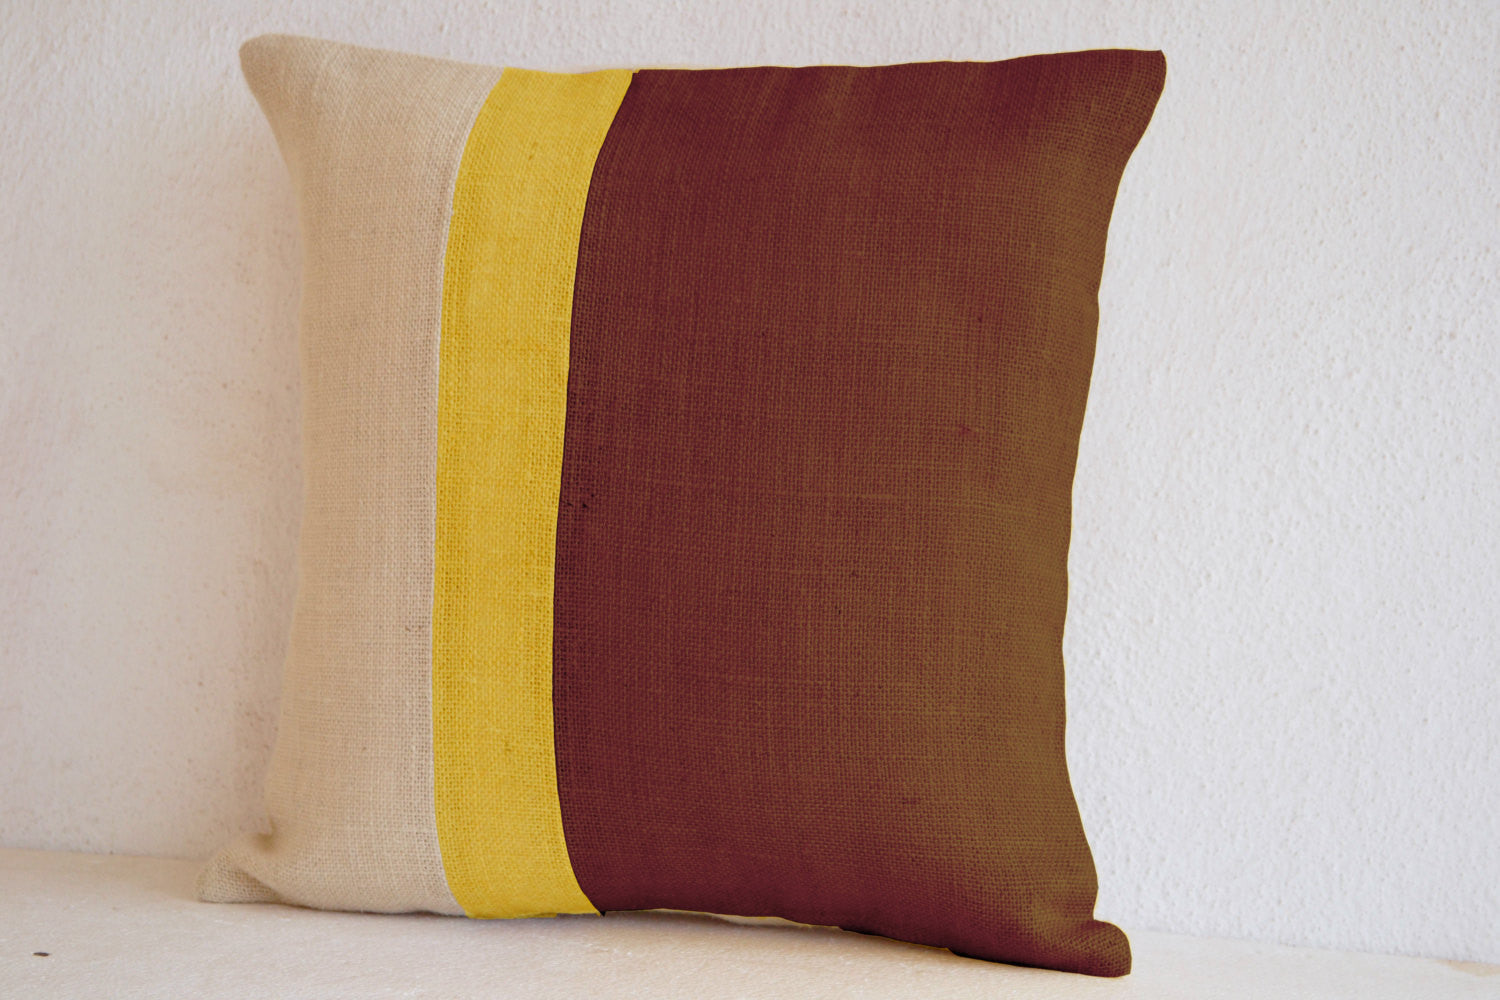 Handmade taupe throw pillows with color block